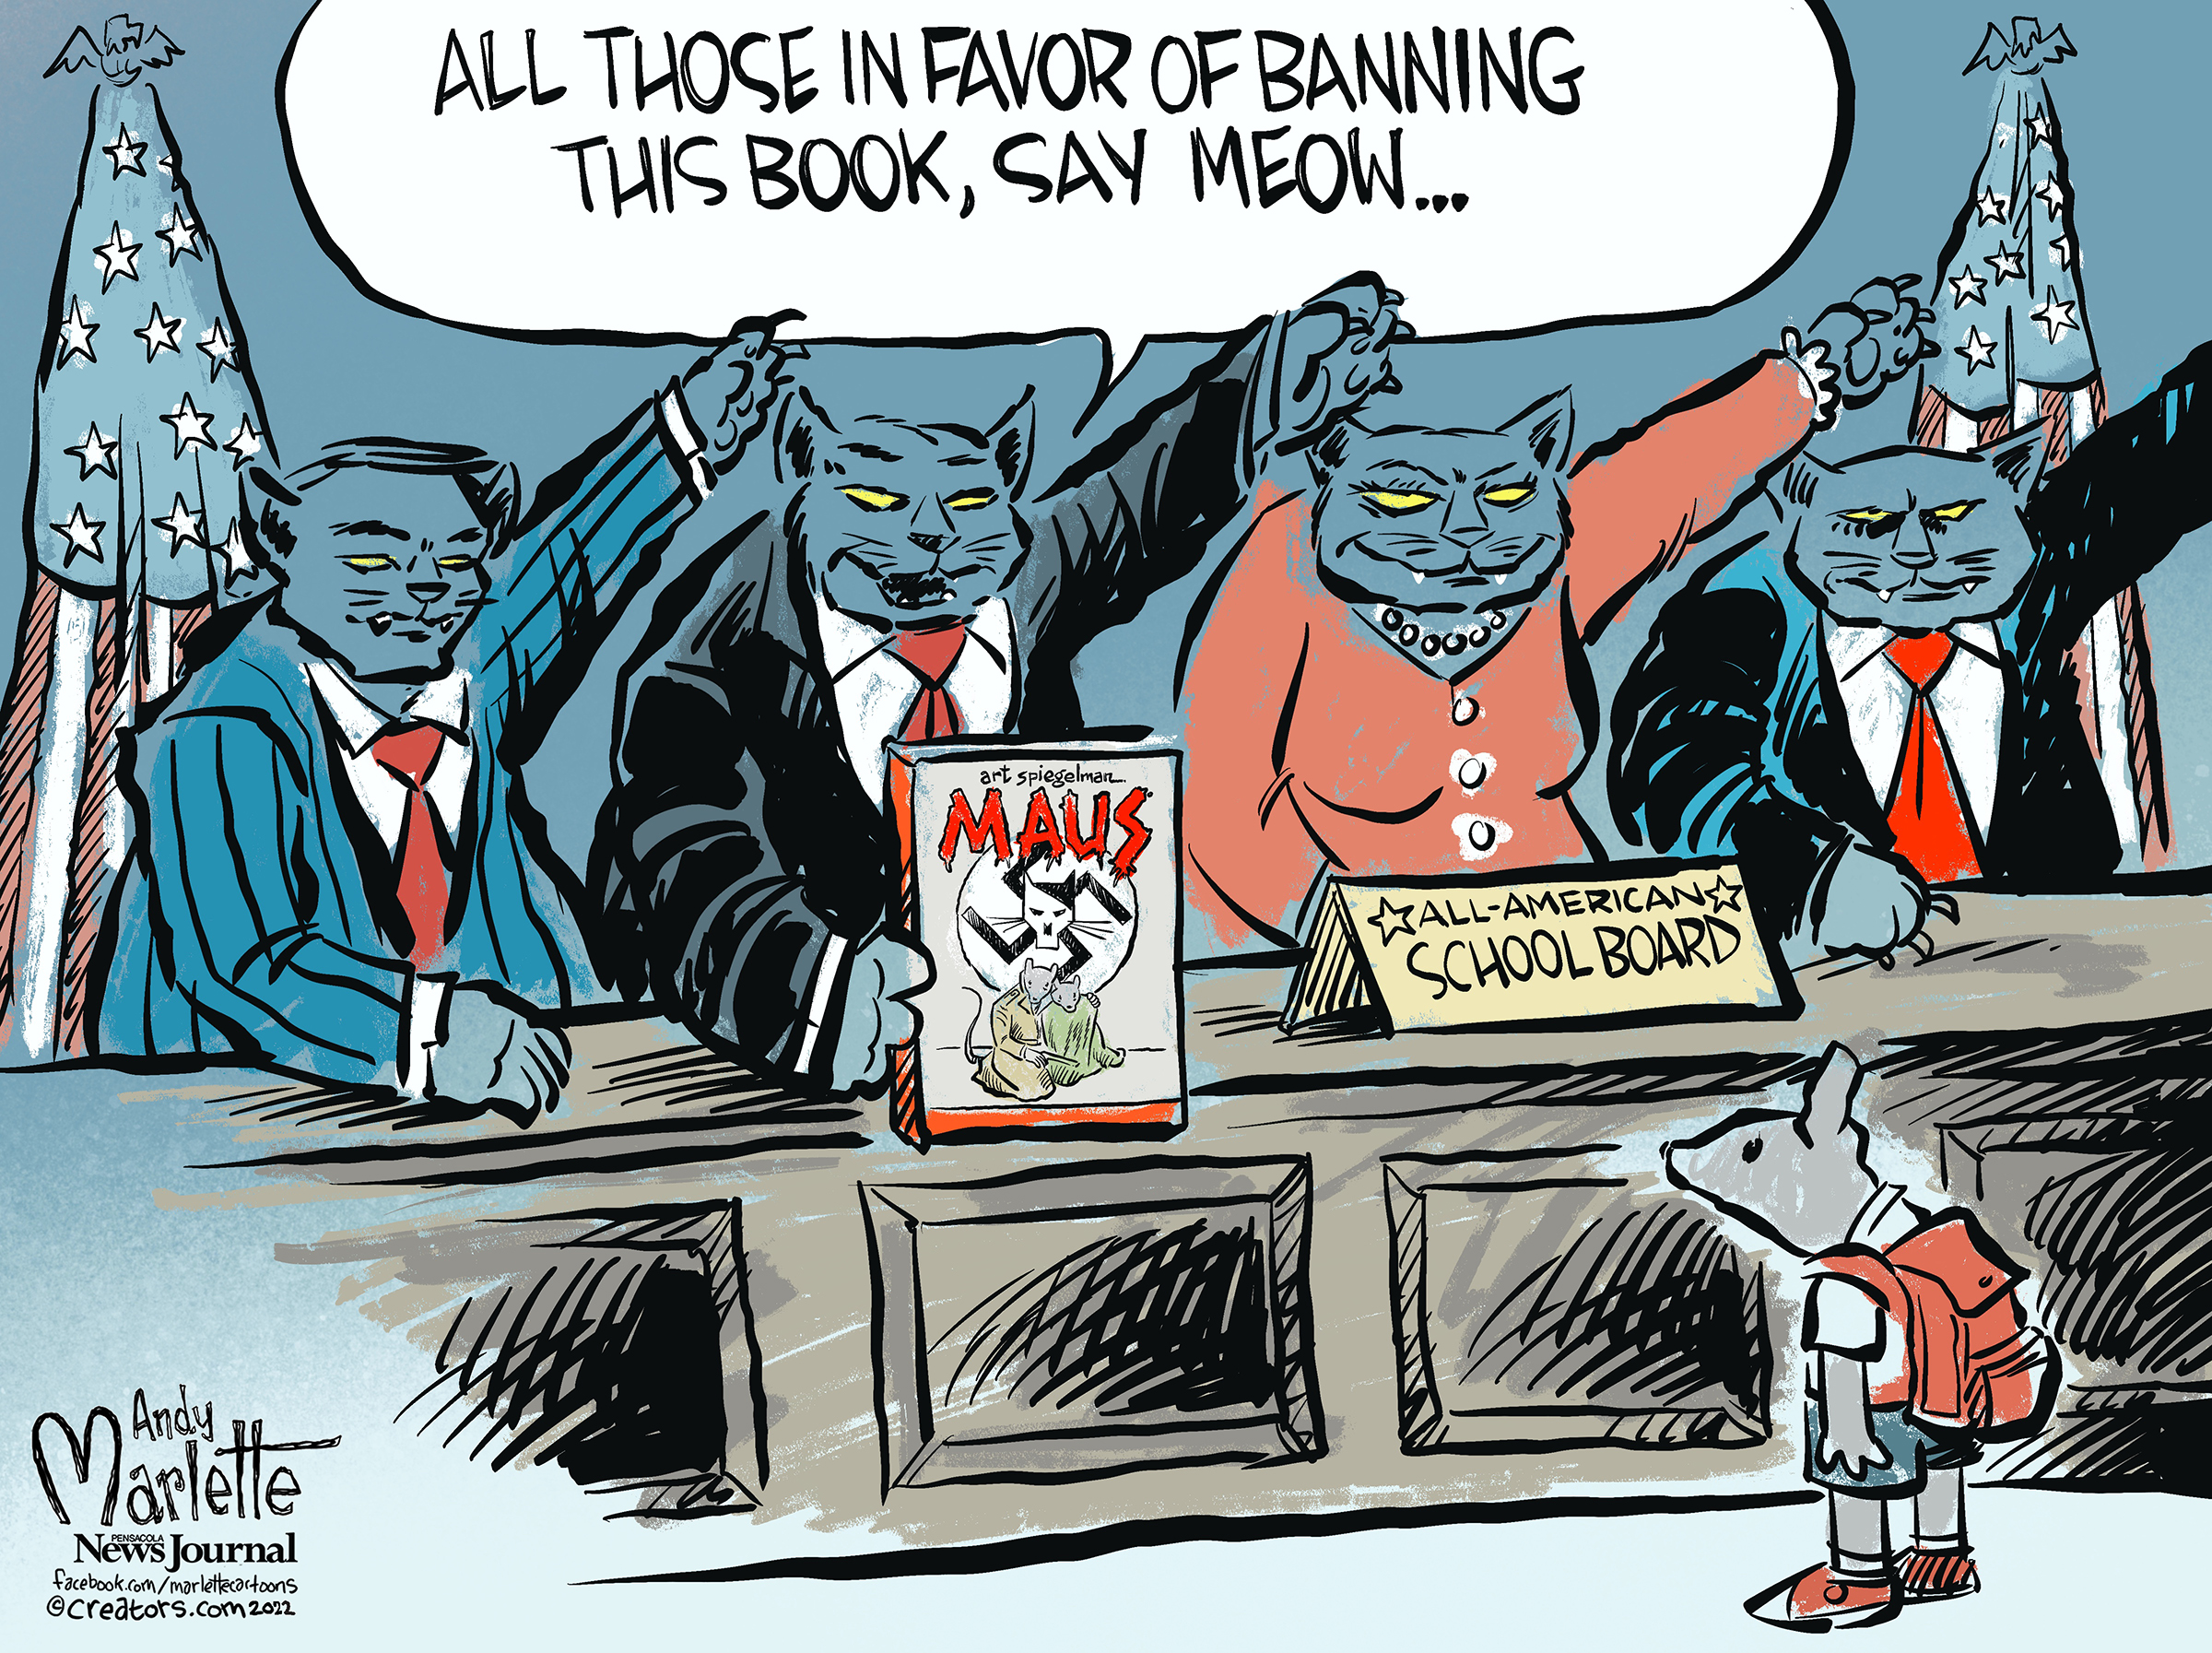 Andy Marlette on Twitter: 